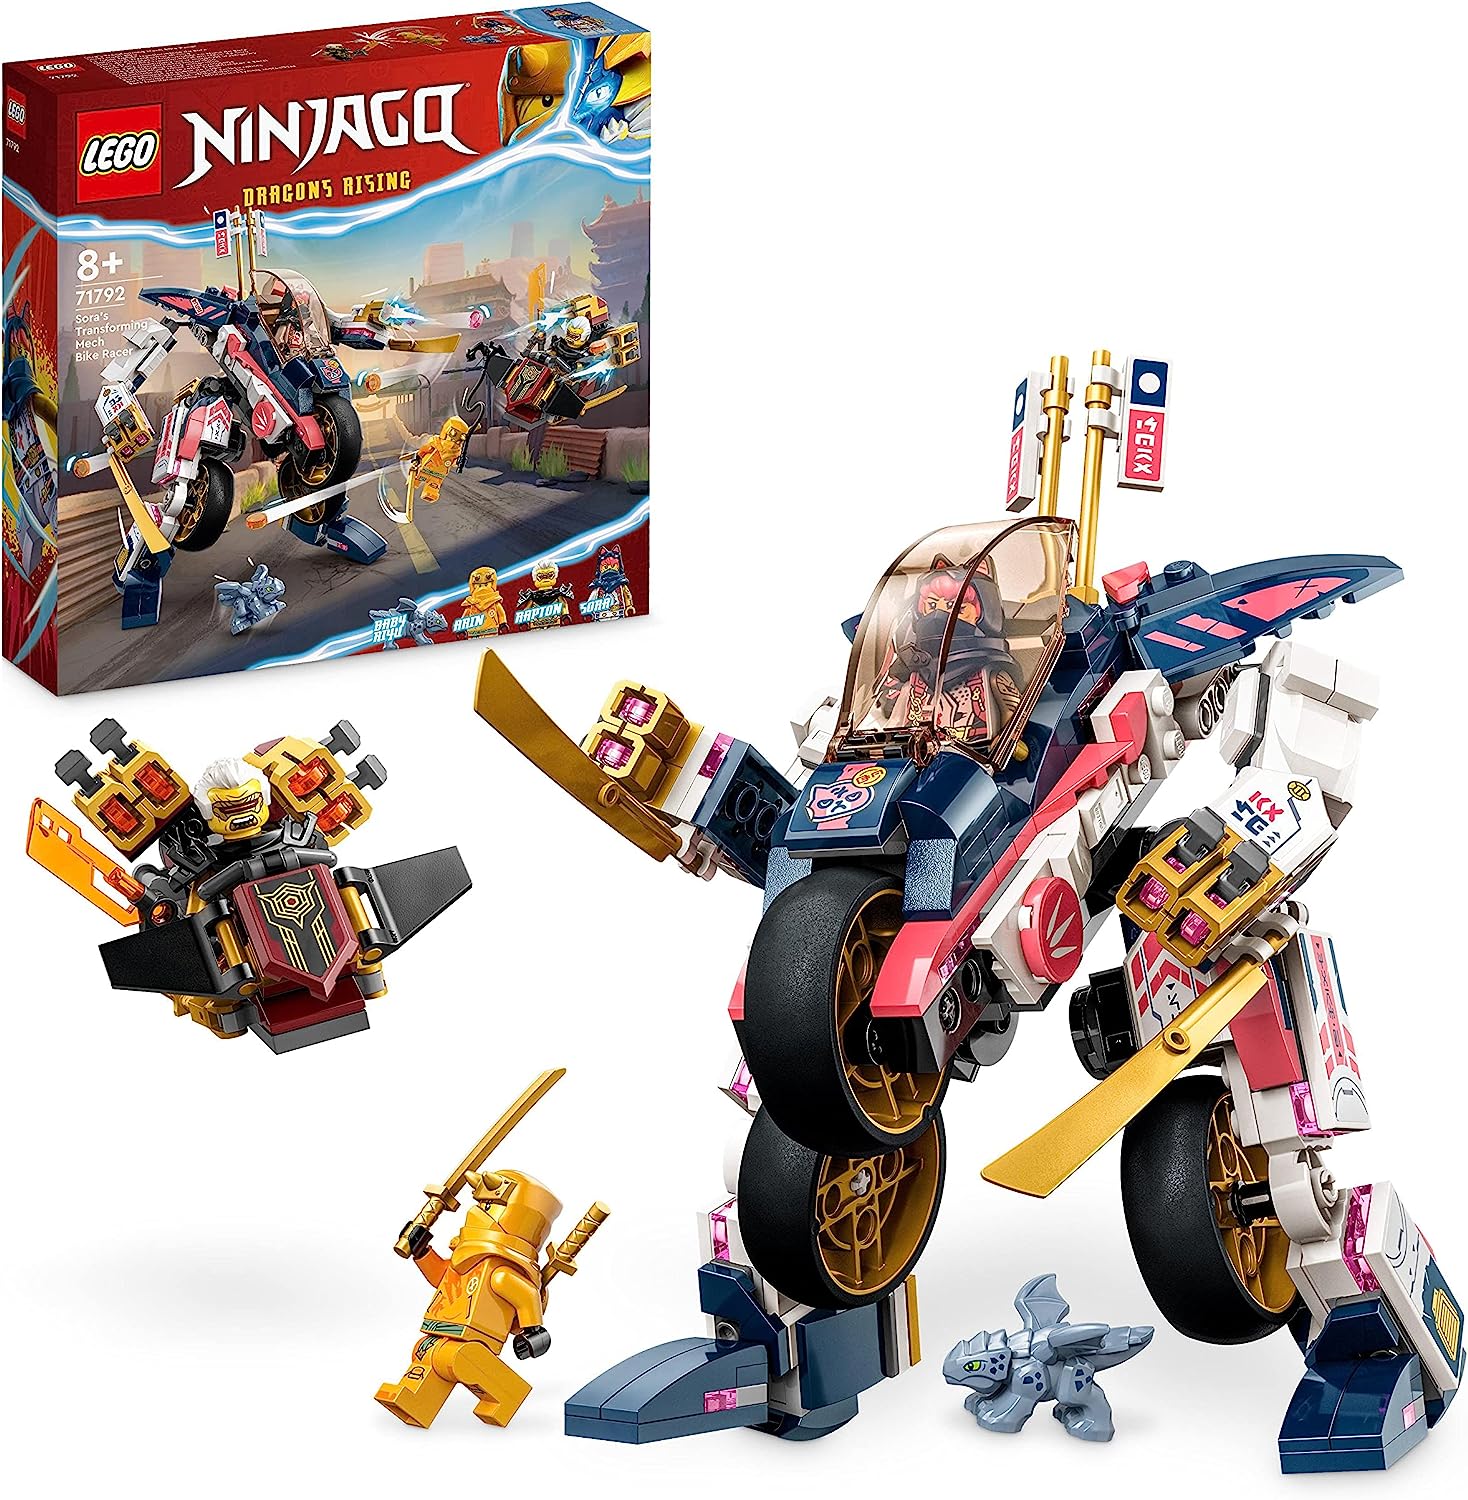 LEGO 71792 Ninjago Soras Transforming Mech Bike Racer, 2-in-1 Set with Transforming Mech Action Figure, Motorcycle Toy Set With 3 Mini Figures for Kids, Boys and Girls